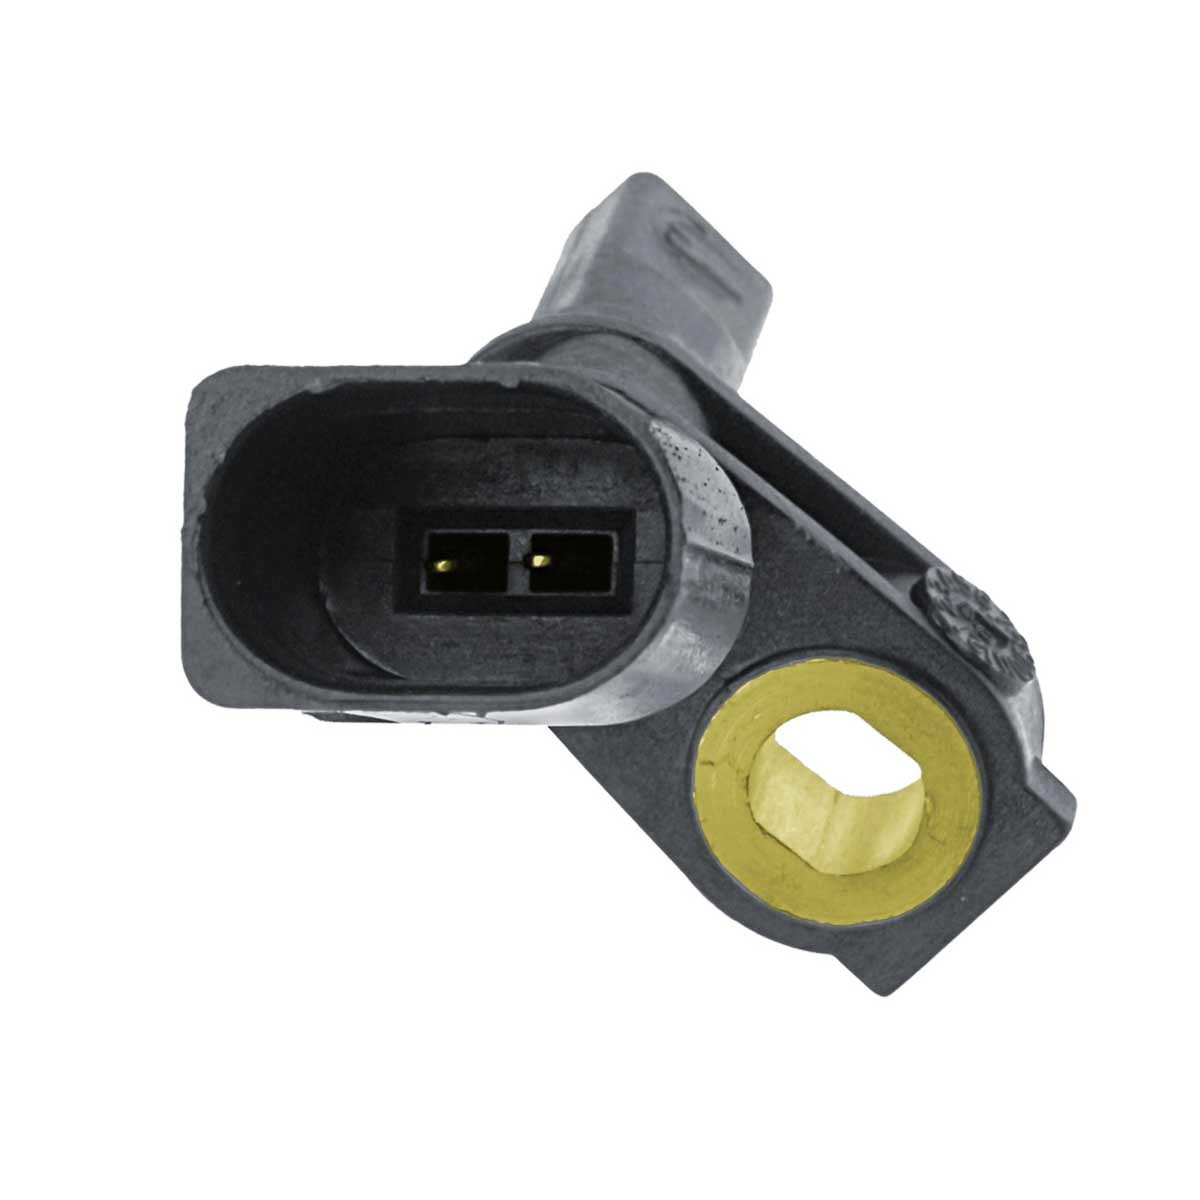 MEYLE 1008990052 ABS sensor Front Axle Right, without cable, ORIGINAL Quality, for vehicles with ESP, for vehicles with ABS, Active sensor, 2-pin connector